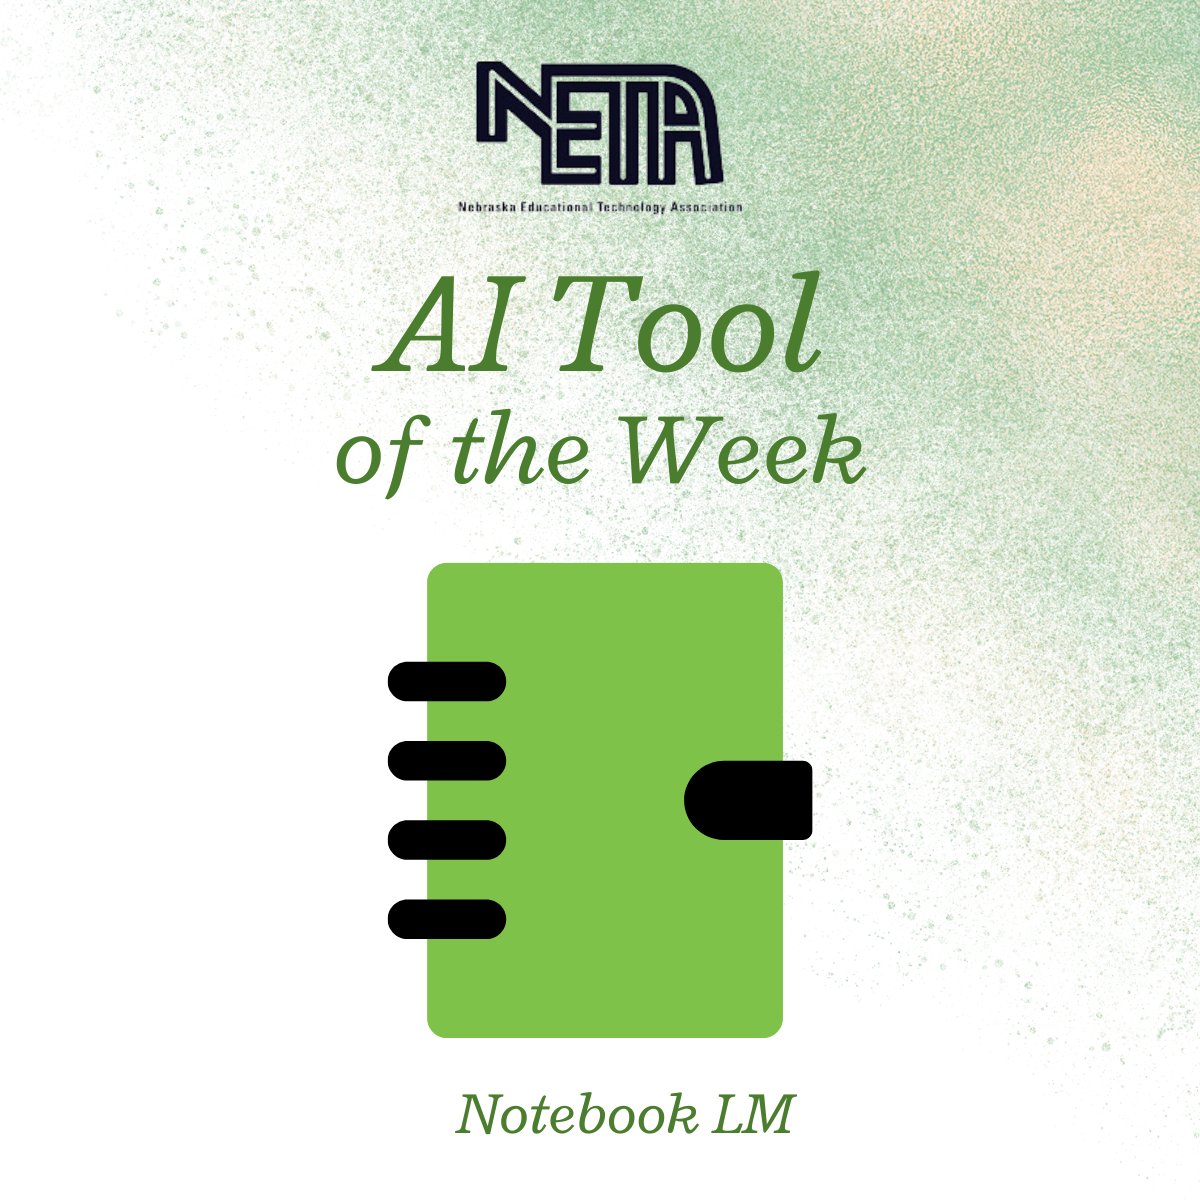 The AI tool of the Week is Notebook LM! Thanks to Jackie Ediger for introducing this AI-powered notetaking Google tool (for 18+ users). This research tool organizes and summarizes info from your Drive, PDF, or docs. Here's a cool video to see how it works! youtube.com/watch?v=iWPjBw…